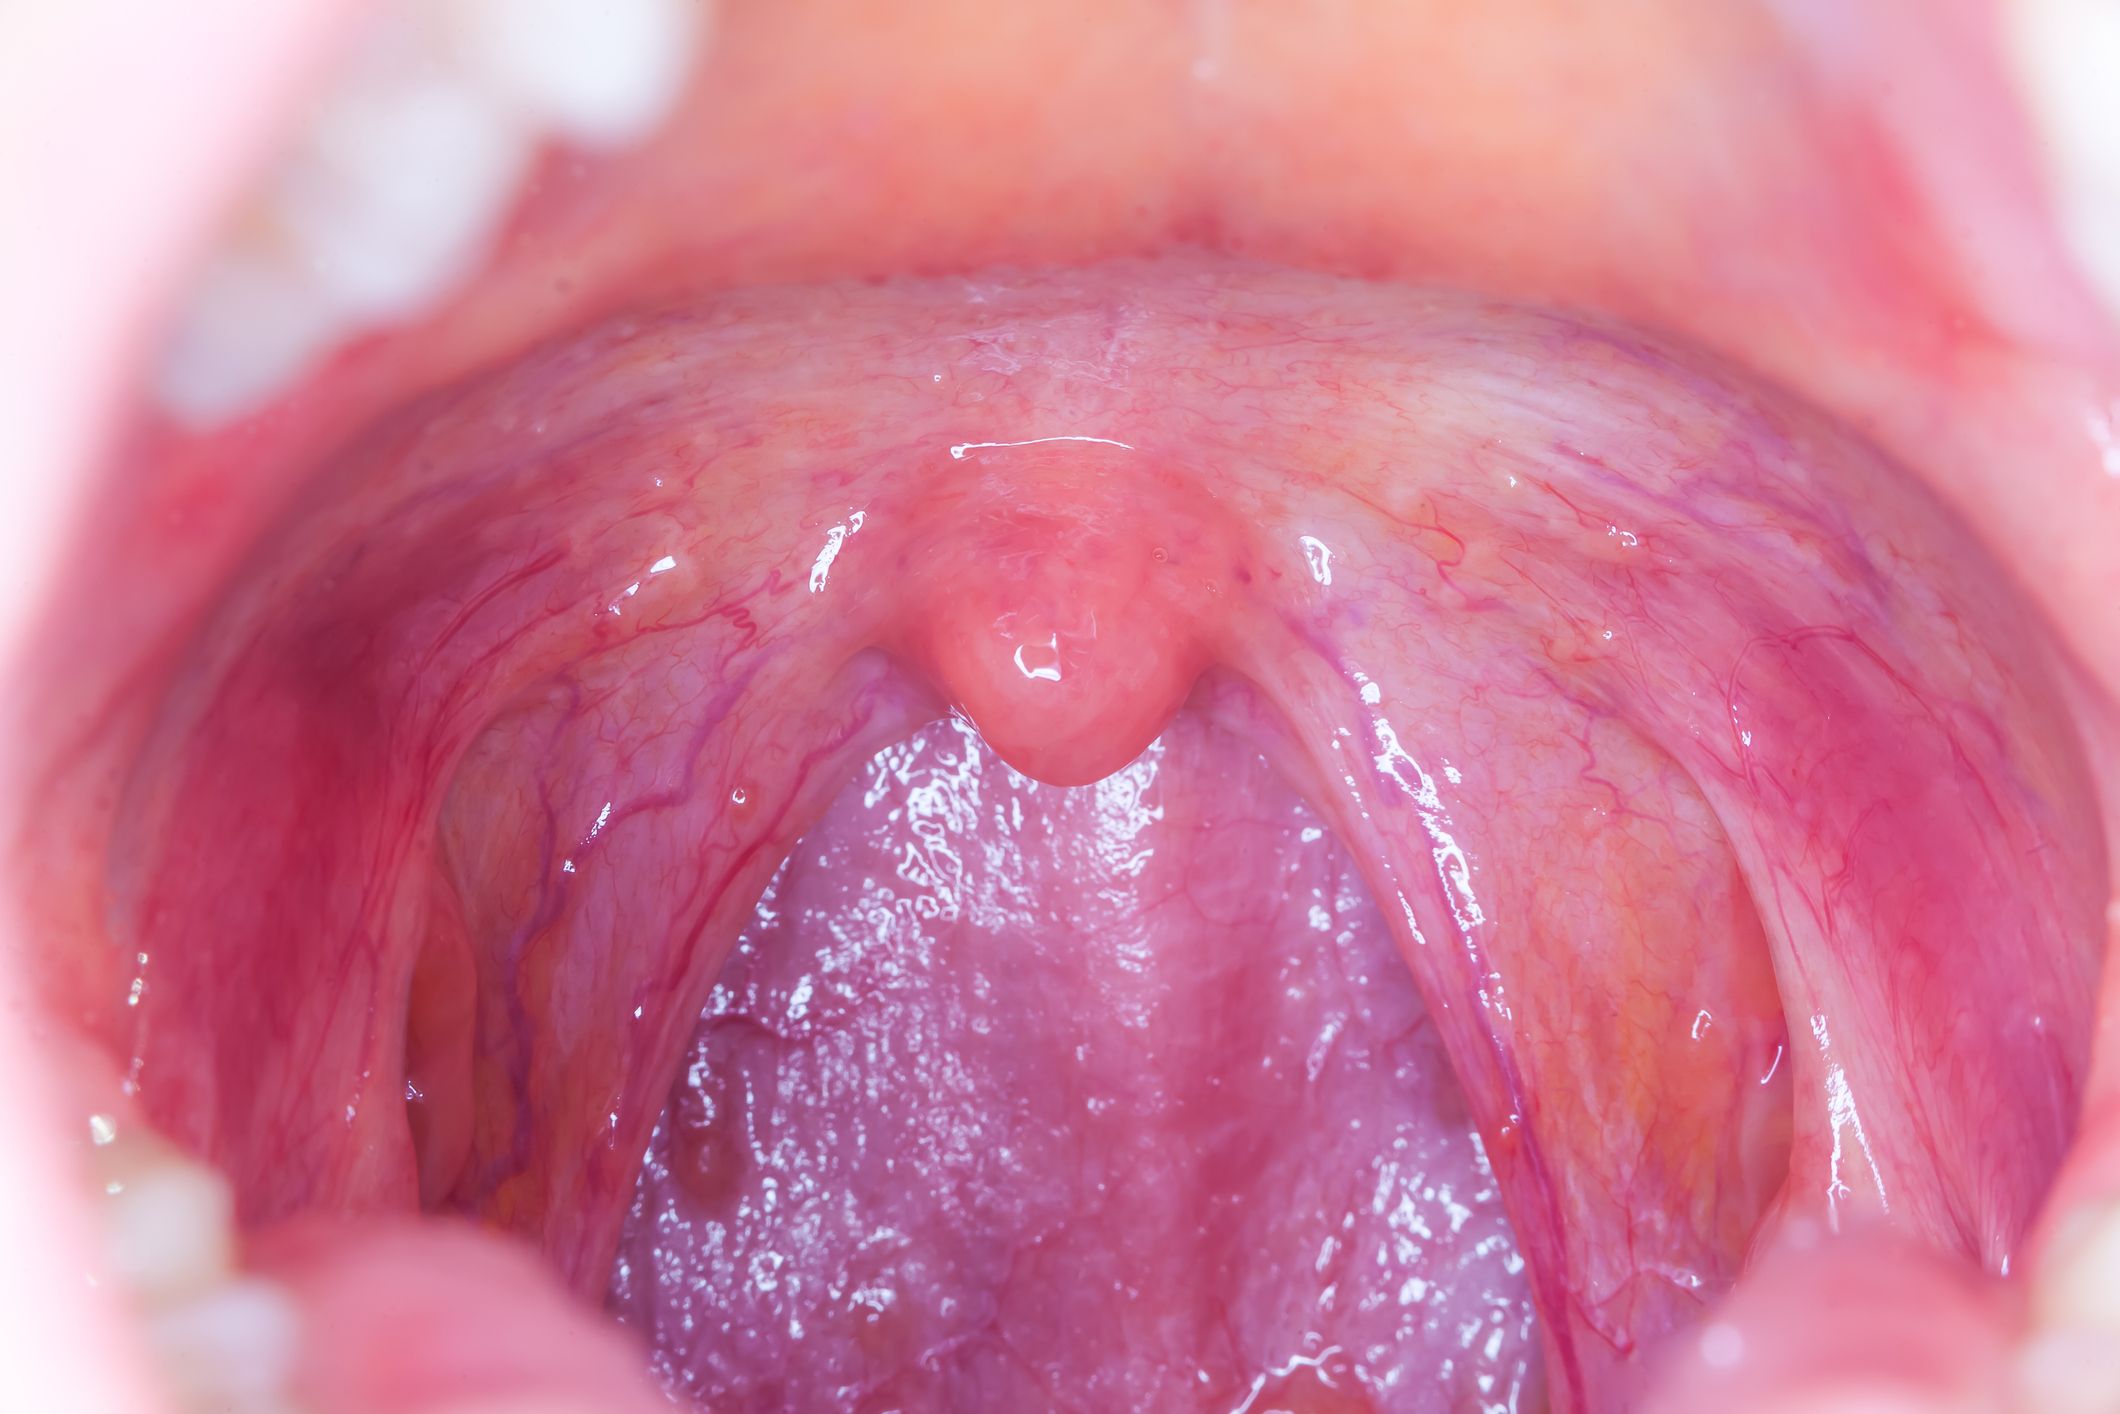 normal tonsils vs infected tonsils